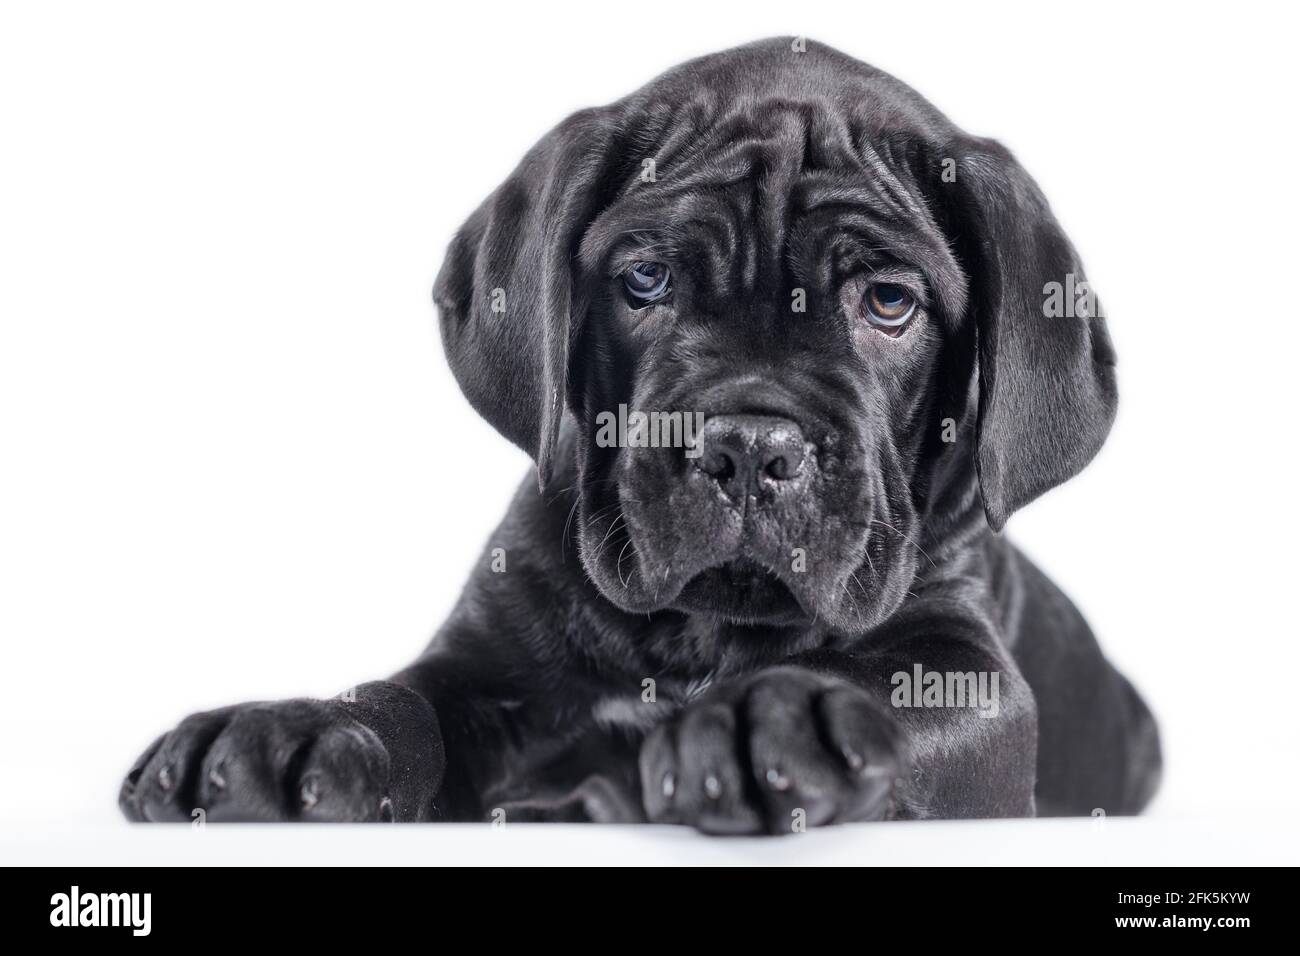 https://c8.alamy.com/comp/2FK5KYW/black-cane-corso-puppy-looking-up-on-a-white-background-isolated-2FK5KYW.jpg